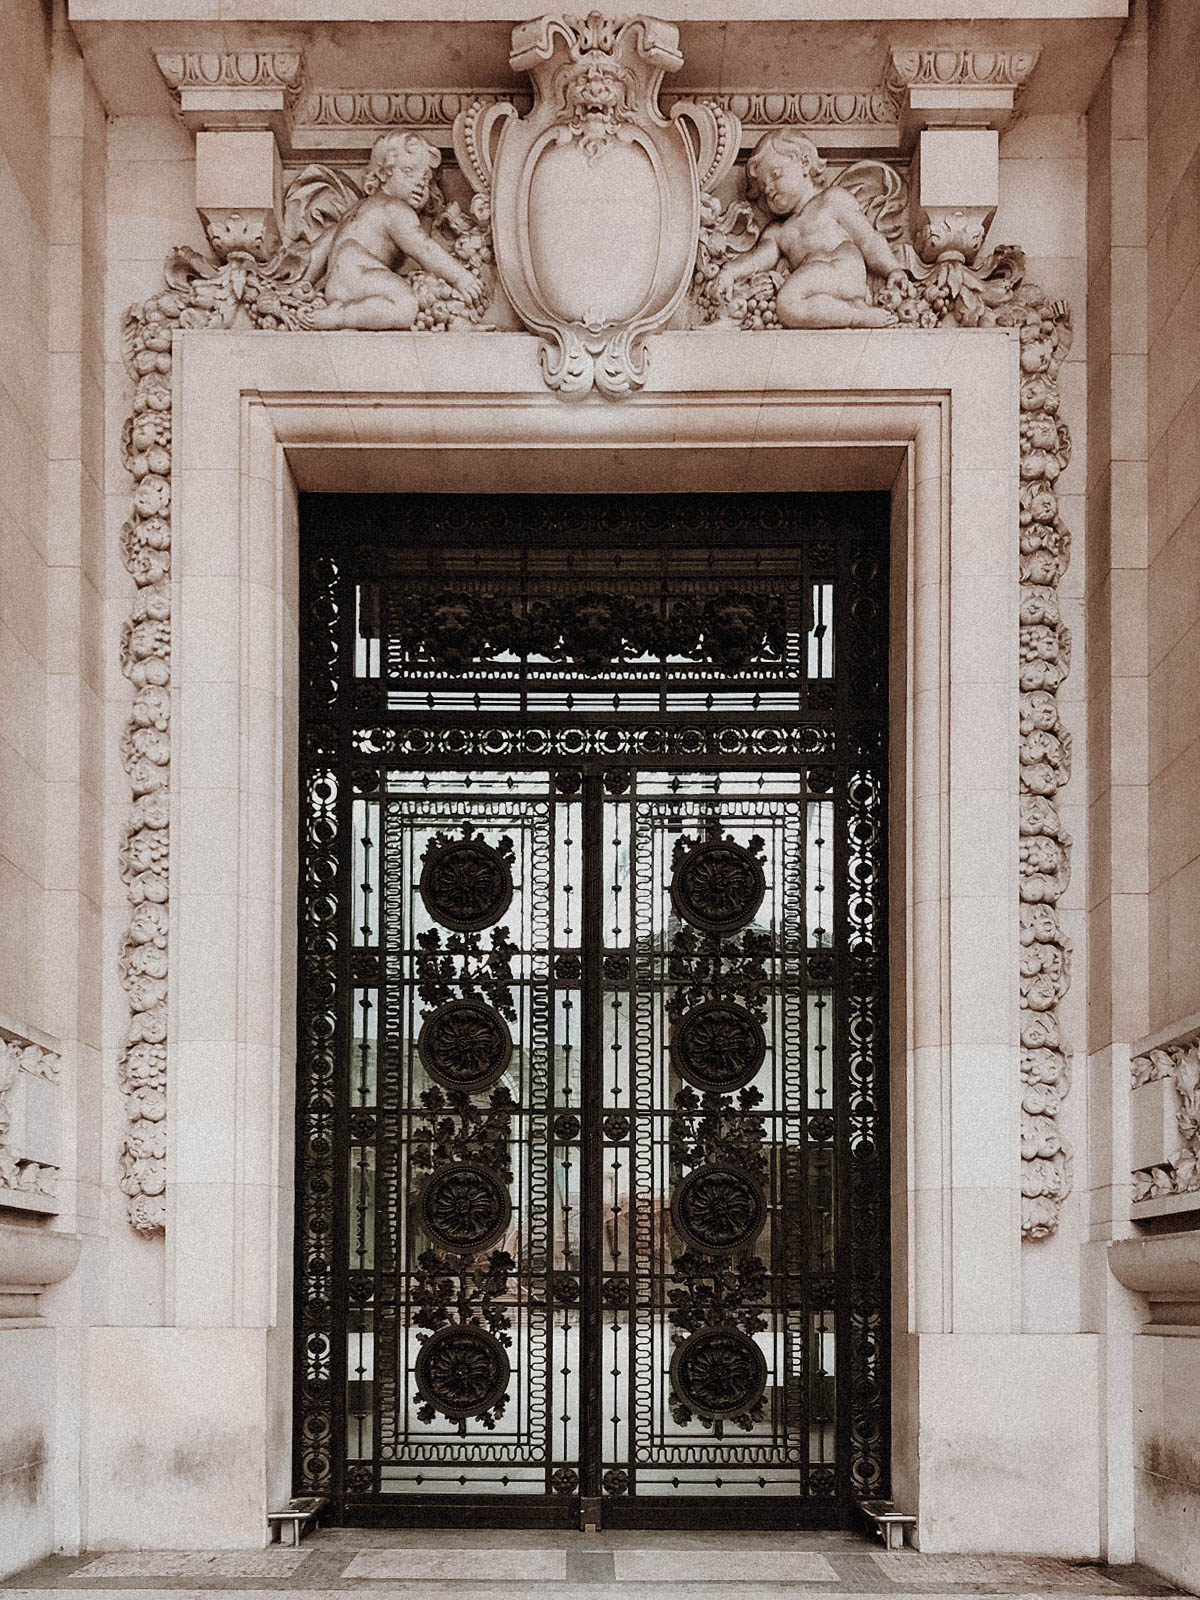 Paris France Travel Guide - Beautiful Door, European Architecture and Buildings / RG Daily Blog